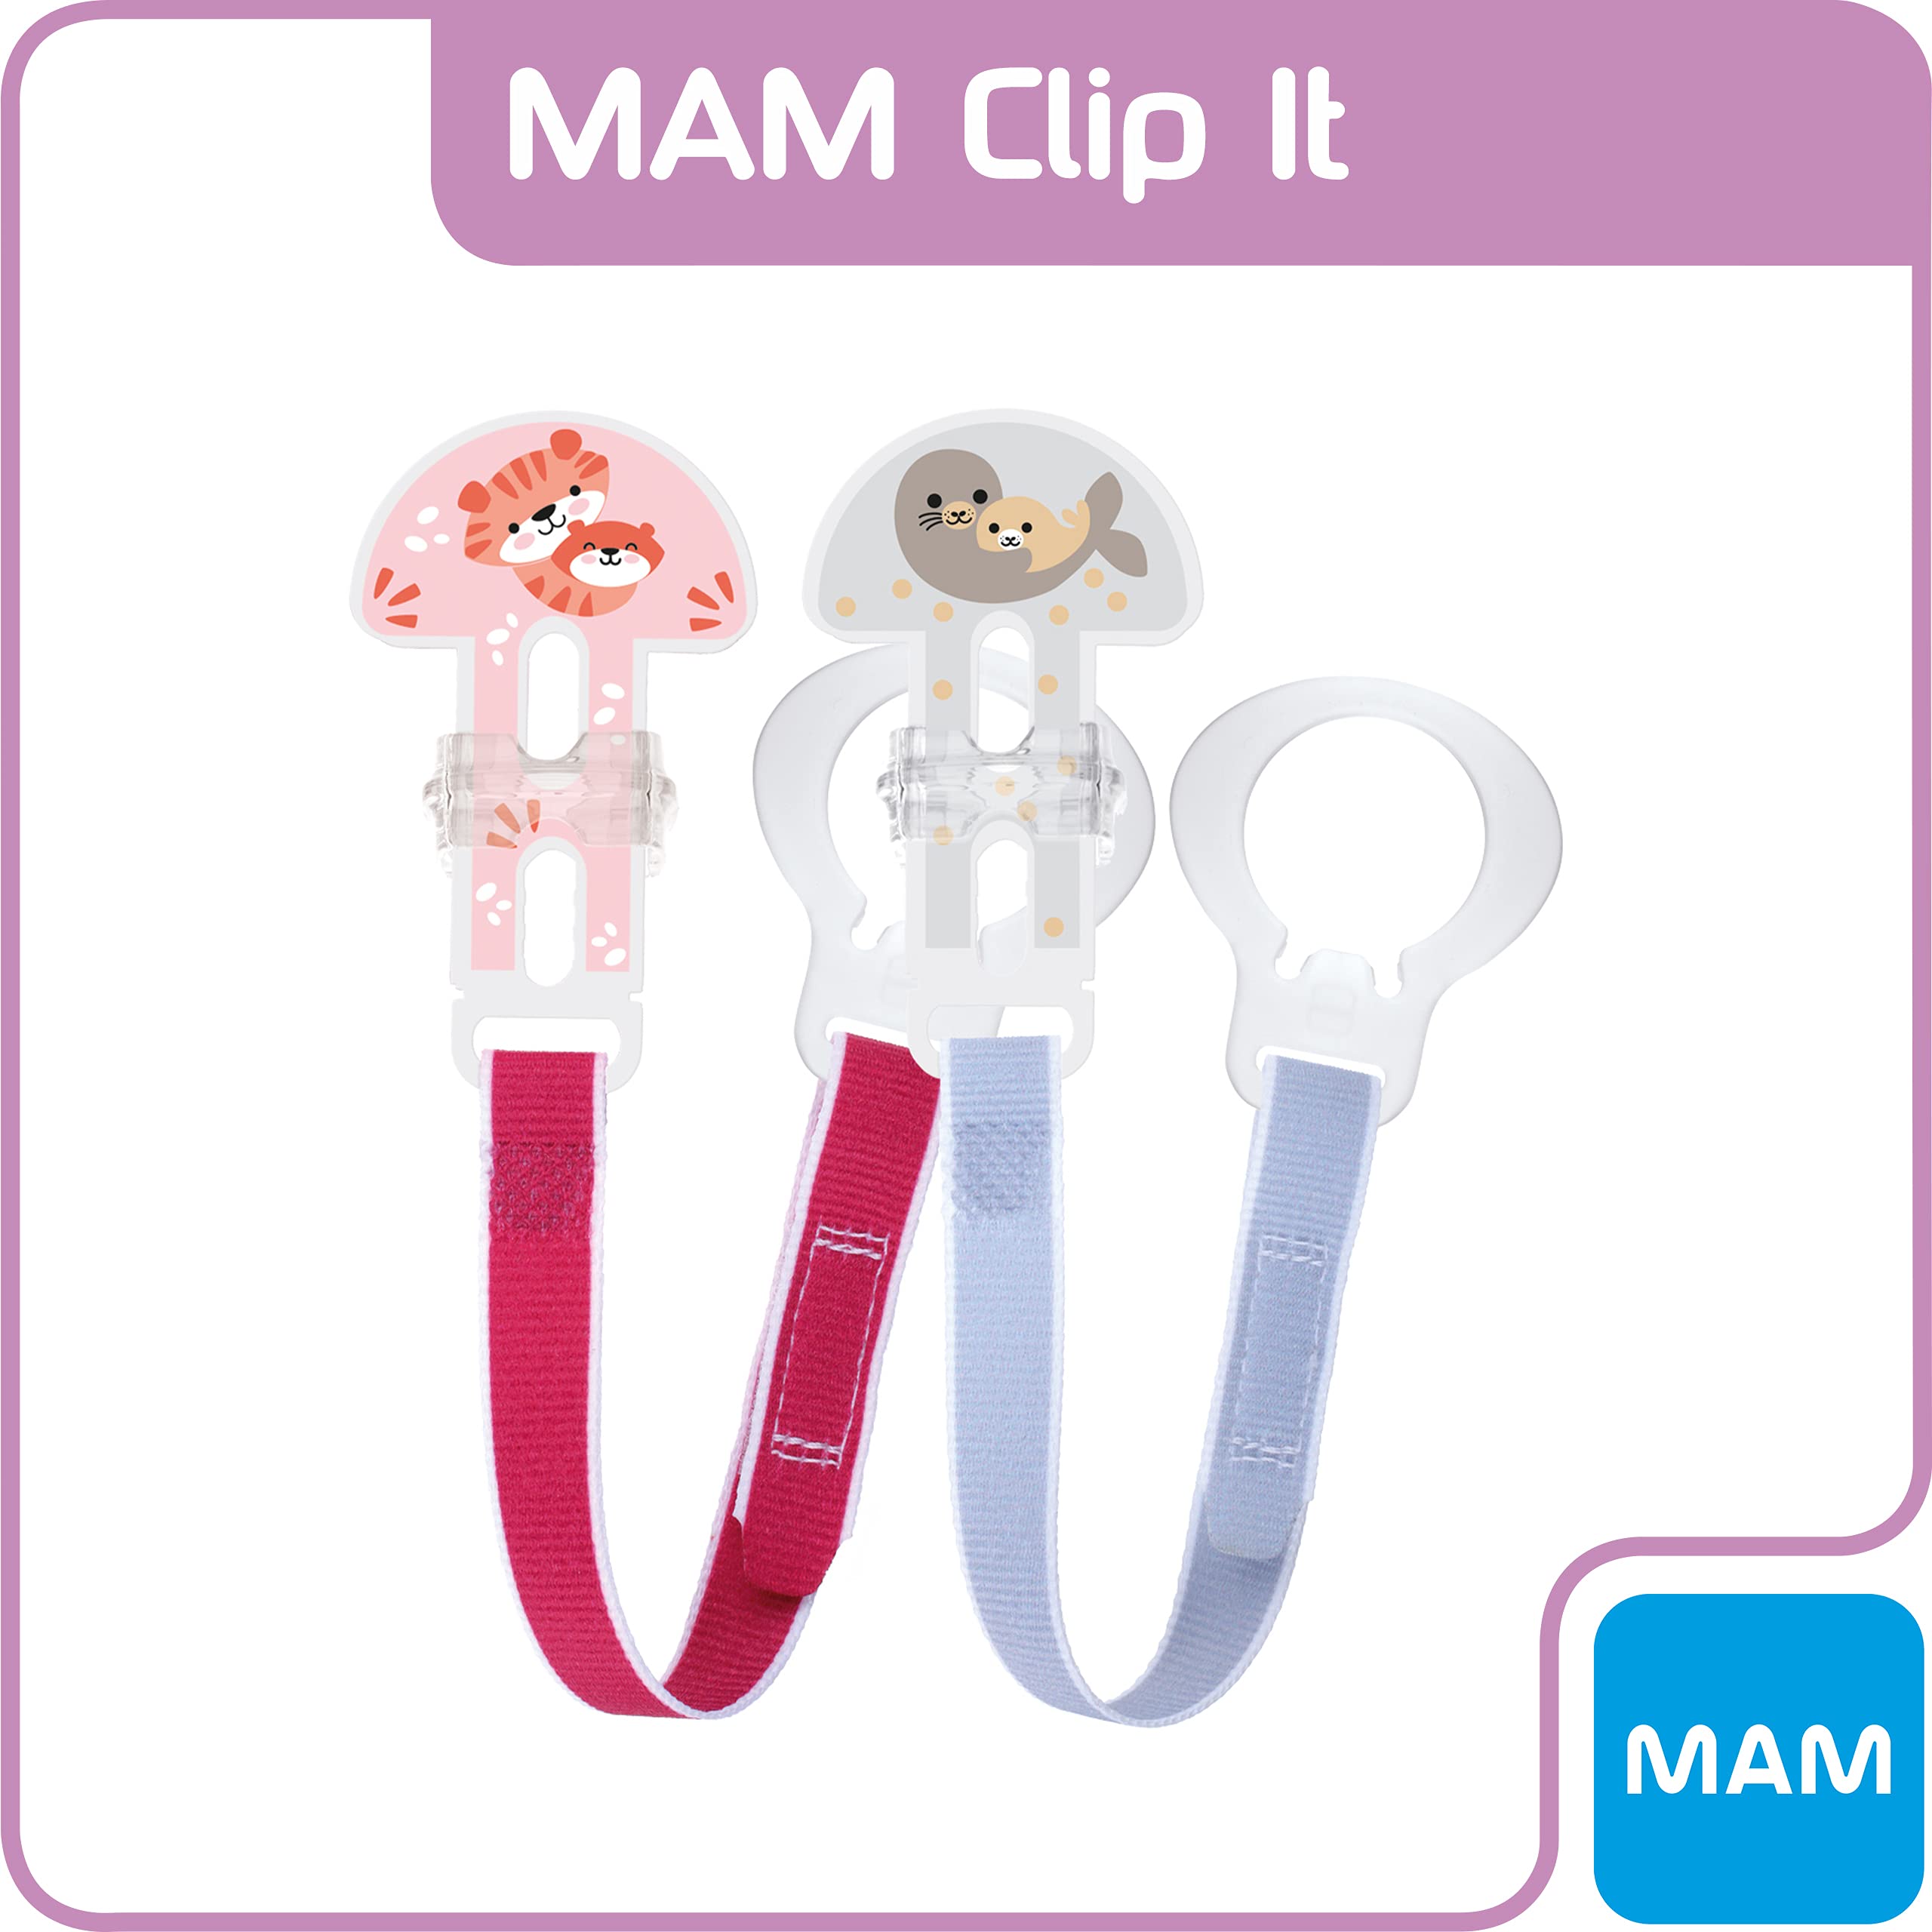 MAM Soother Clips, Pack of 2, Baby Soother Chain Fits All MAM Soothers, Newborn Essentials, Cream - Soothers Not Included (Designs May Vary)